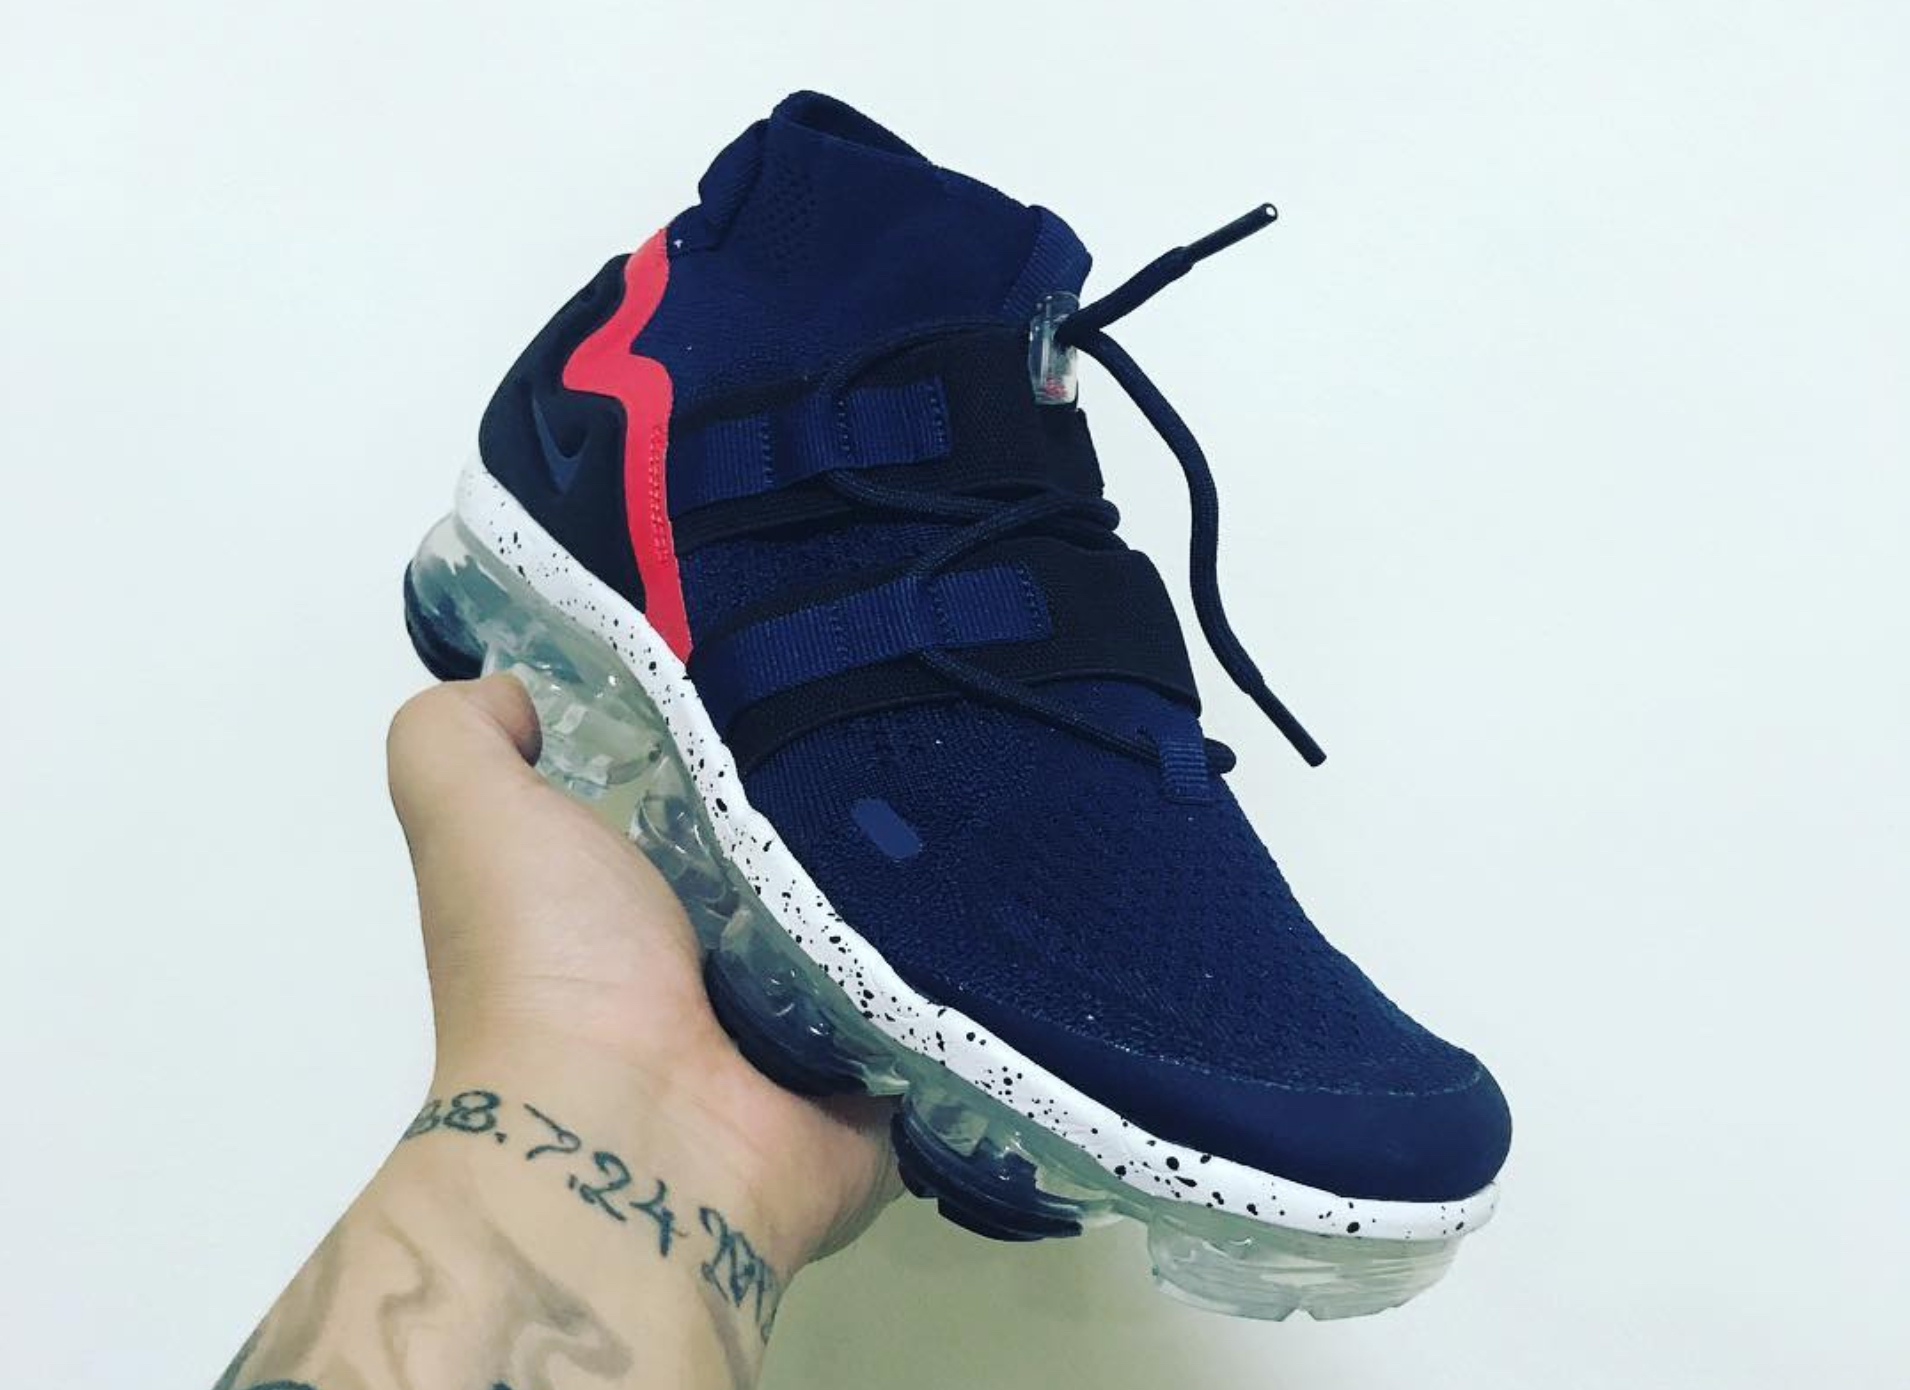 A New Colorway of the Nike VaporMax Mid ATR is Spotted - WearTesters